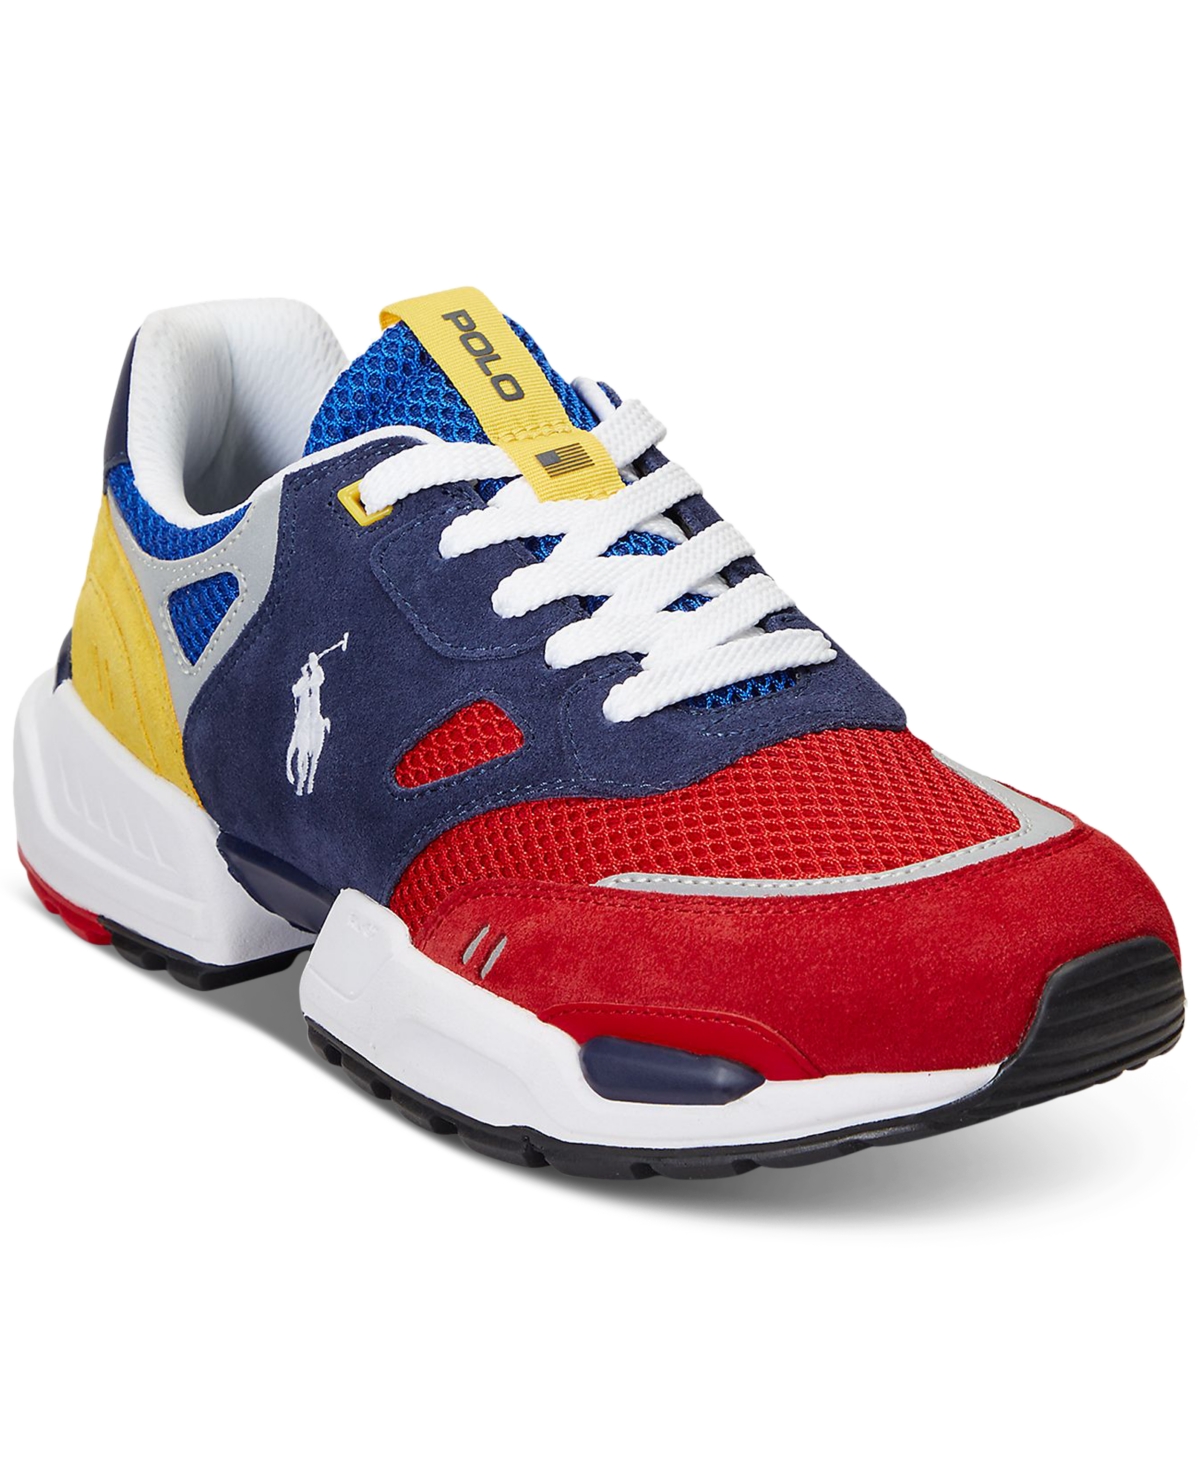 Polo Ralph Lauren Men's Polo Jogger Mixed Media Lace-up Sneakers In Navy,red,royal,yellow